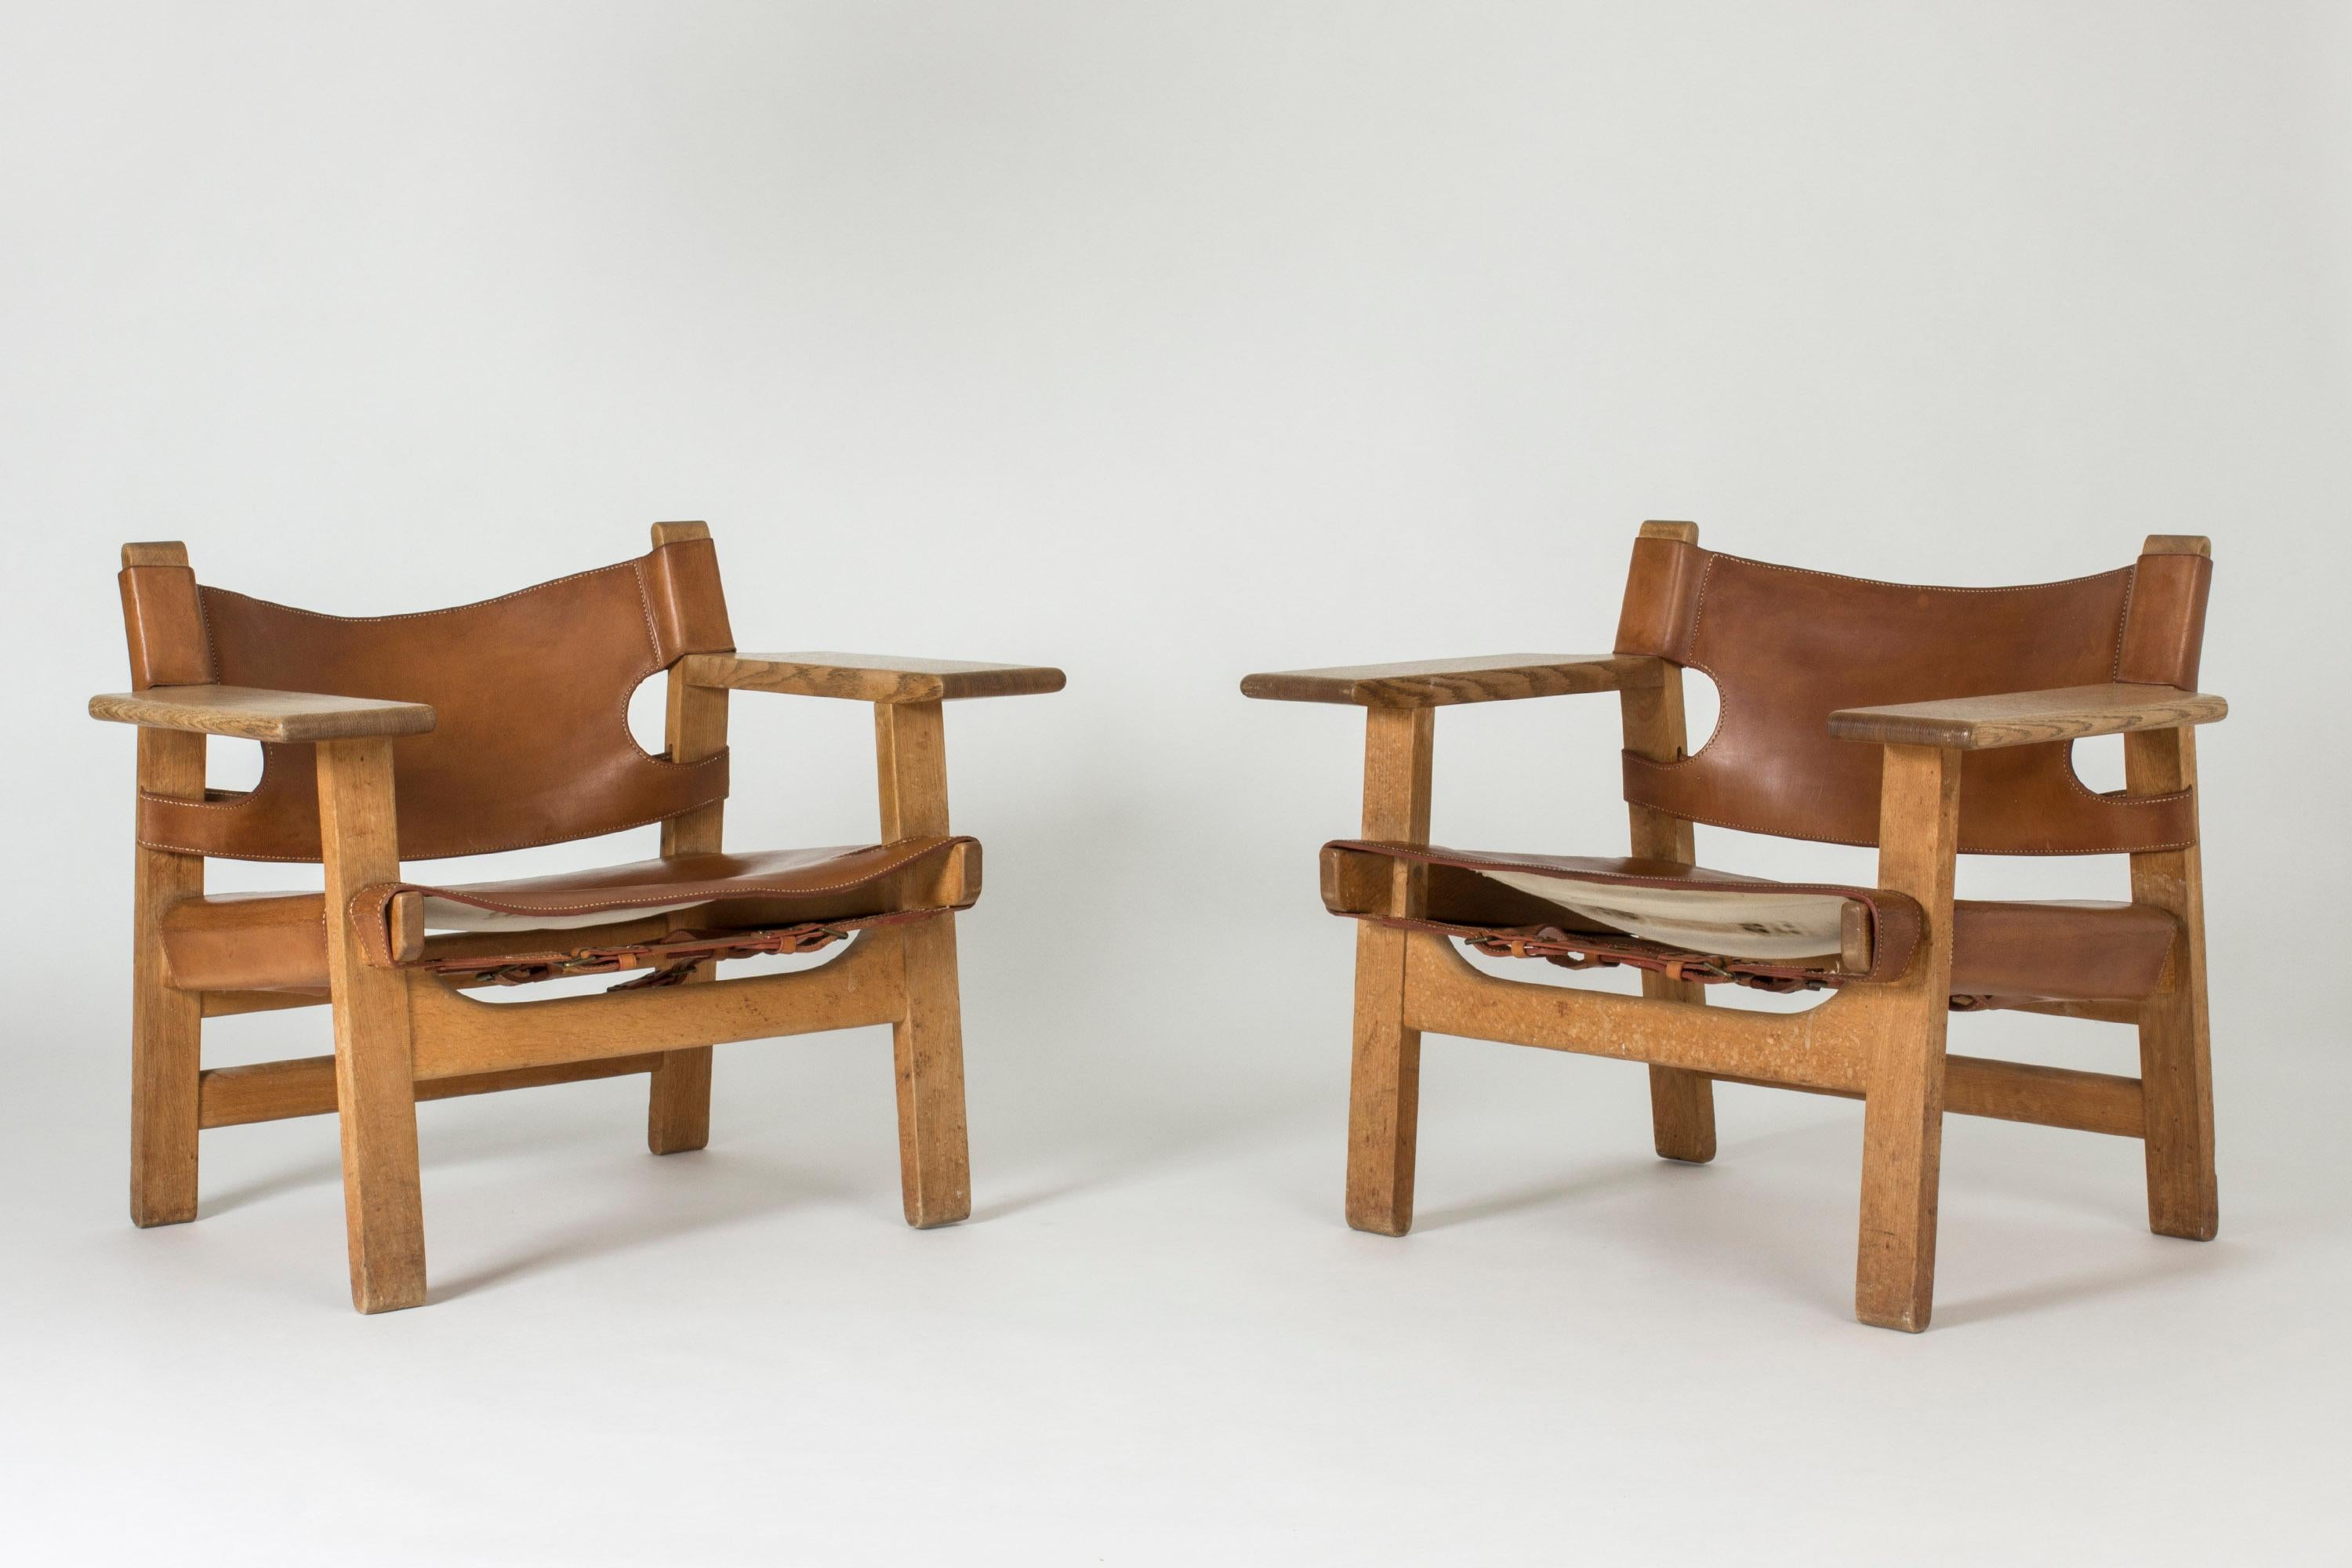 Pair of iconic oak and cognac leather “Spanish Chair” lounge chairs by Børge Mogensen. Mogensen got his inspiration for this design from a trip to Spain in 1958, where he came across a type of traditional chair which he then interpreted in a